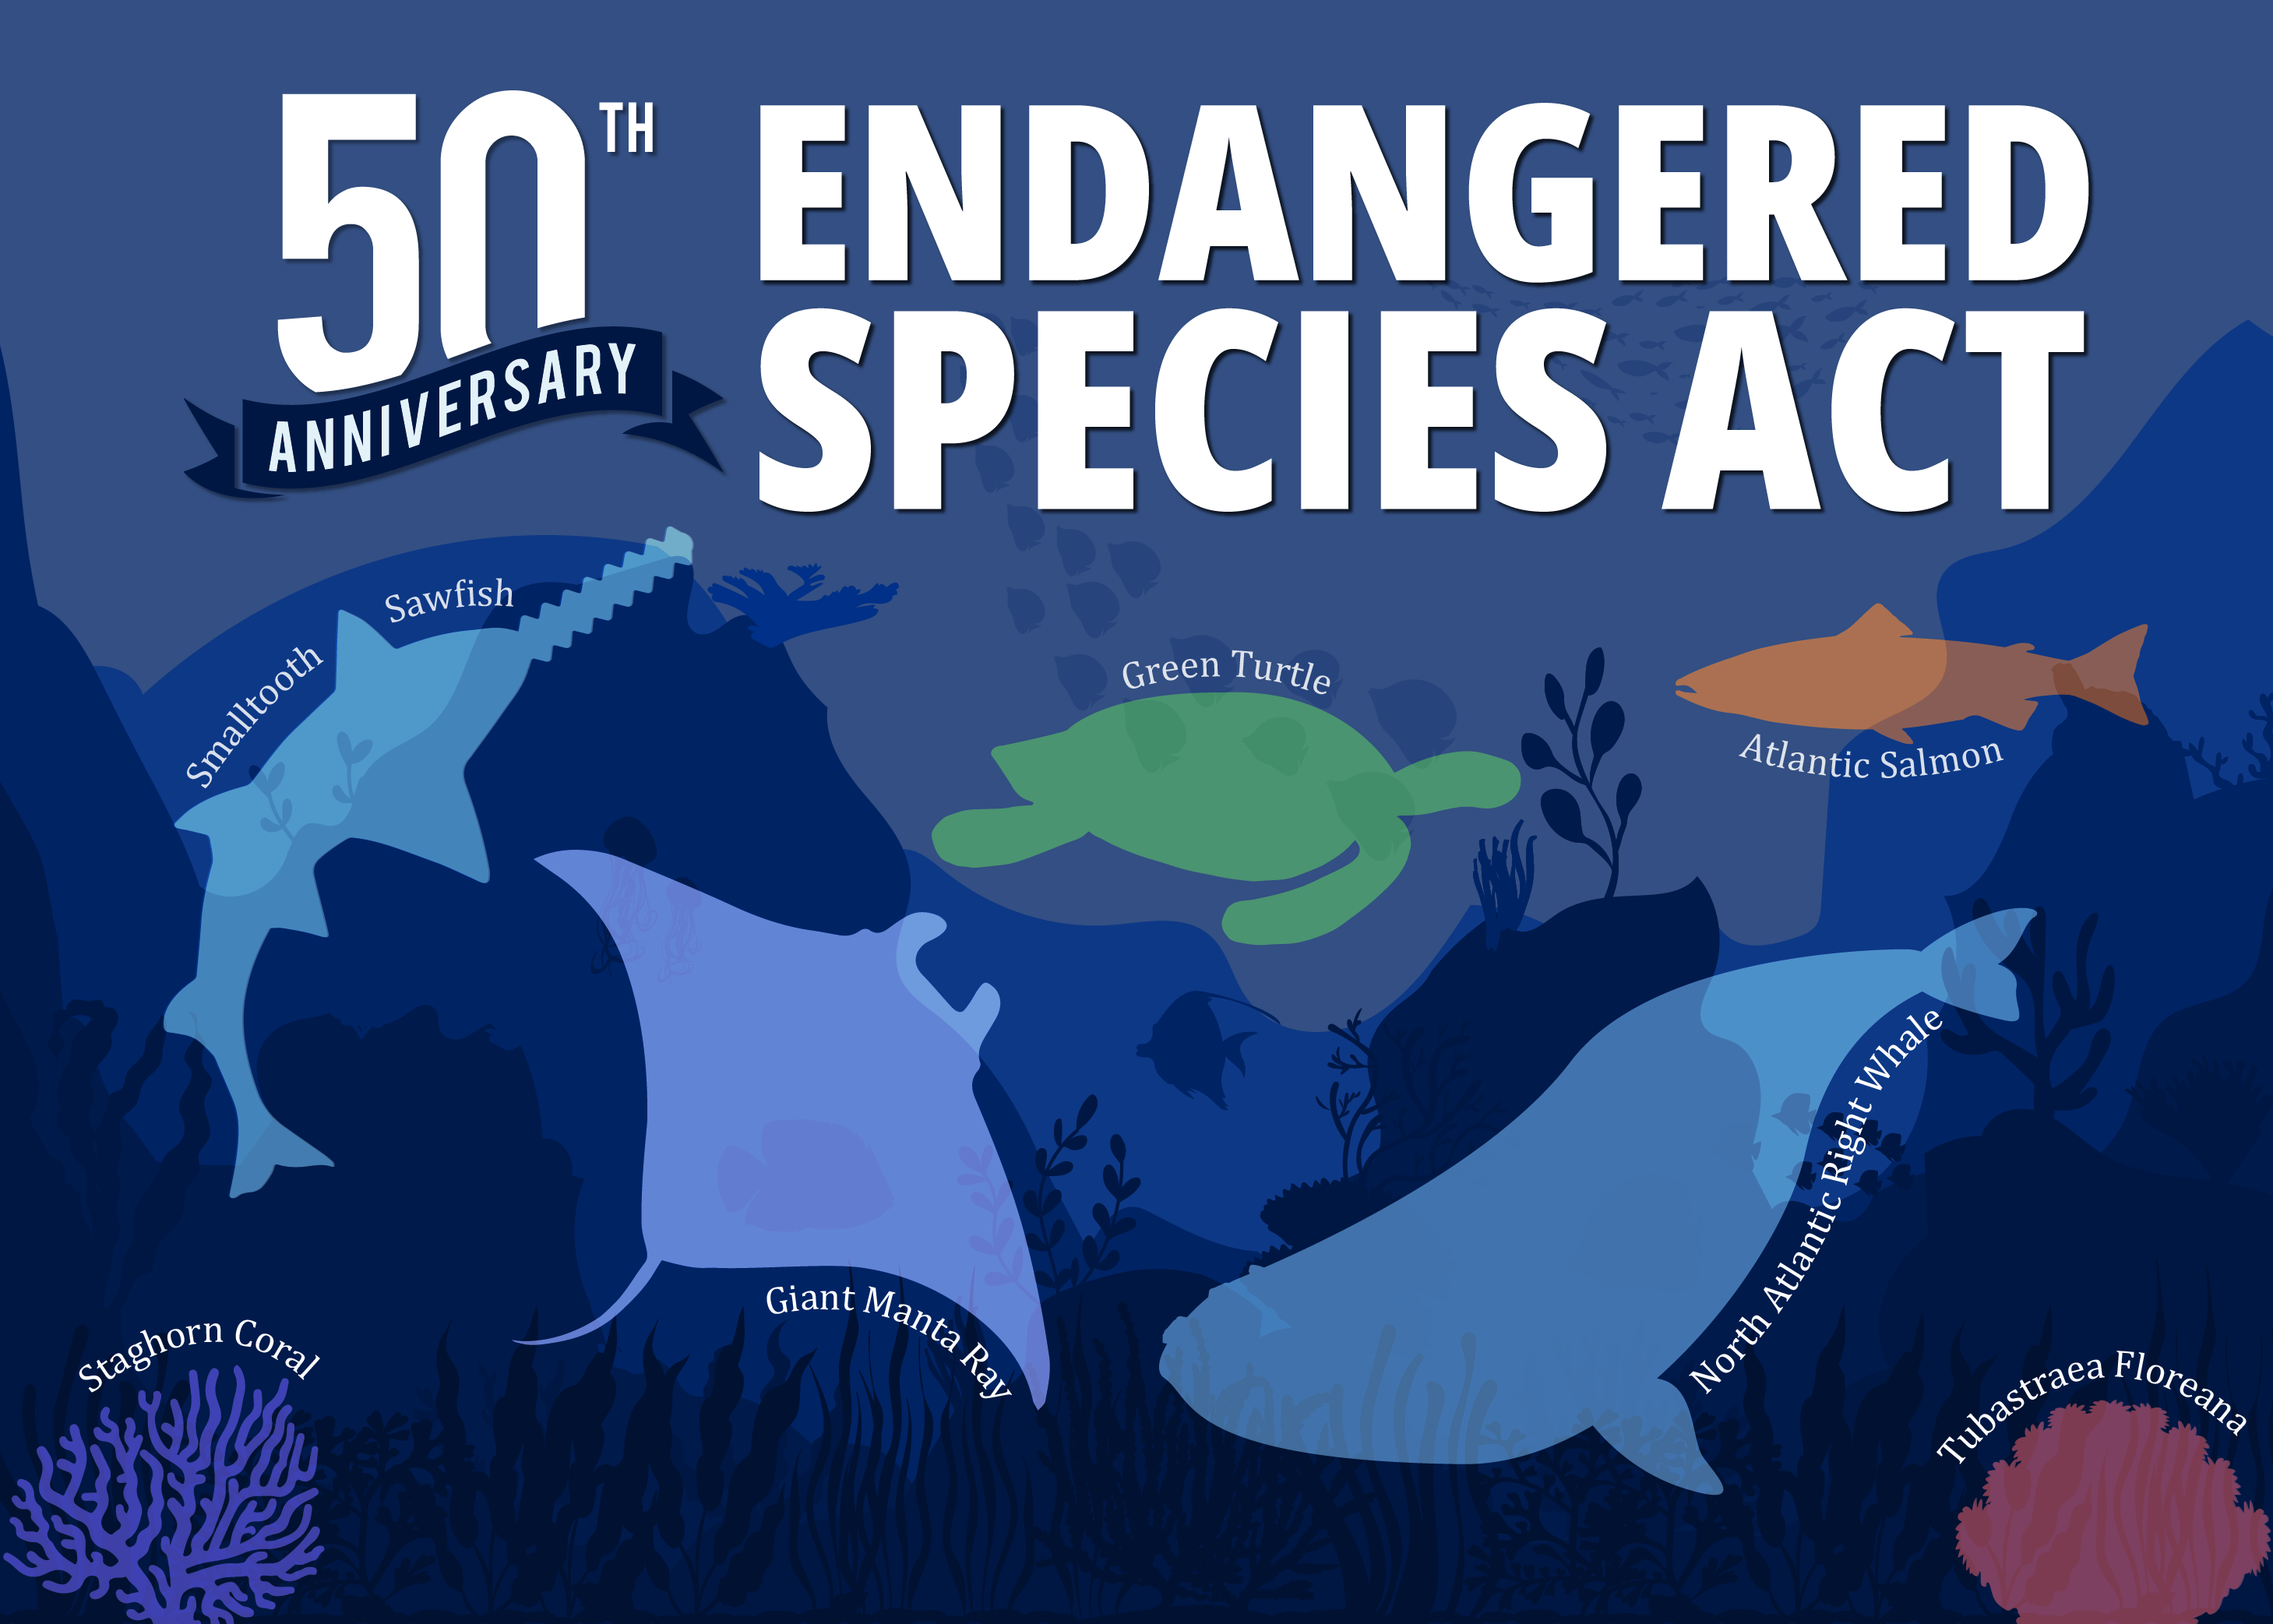 NOAA 50th Anniversary poster - Endangered Species Act 2023